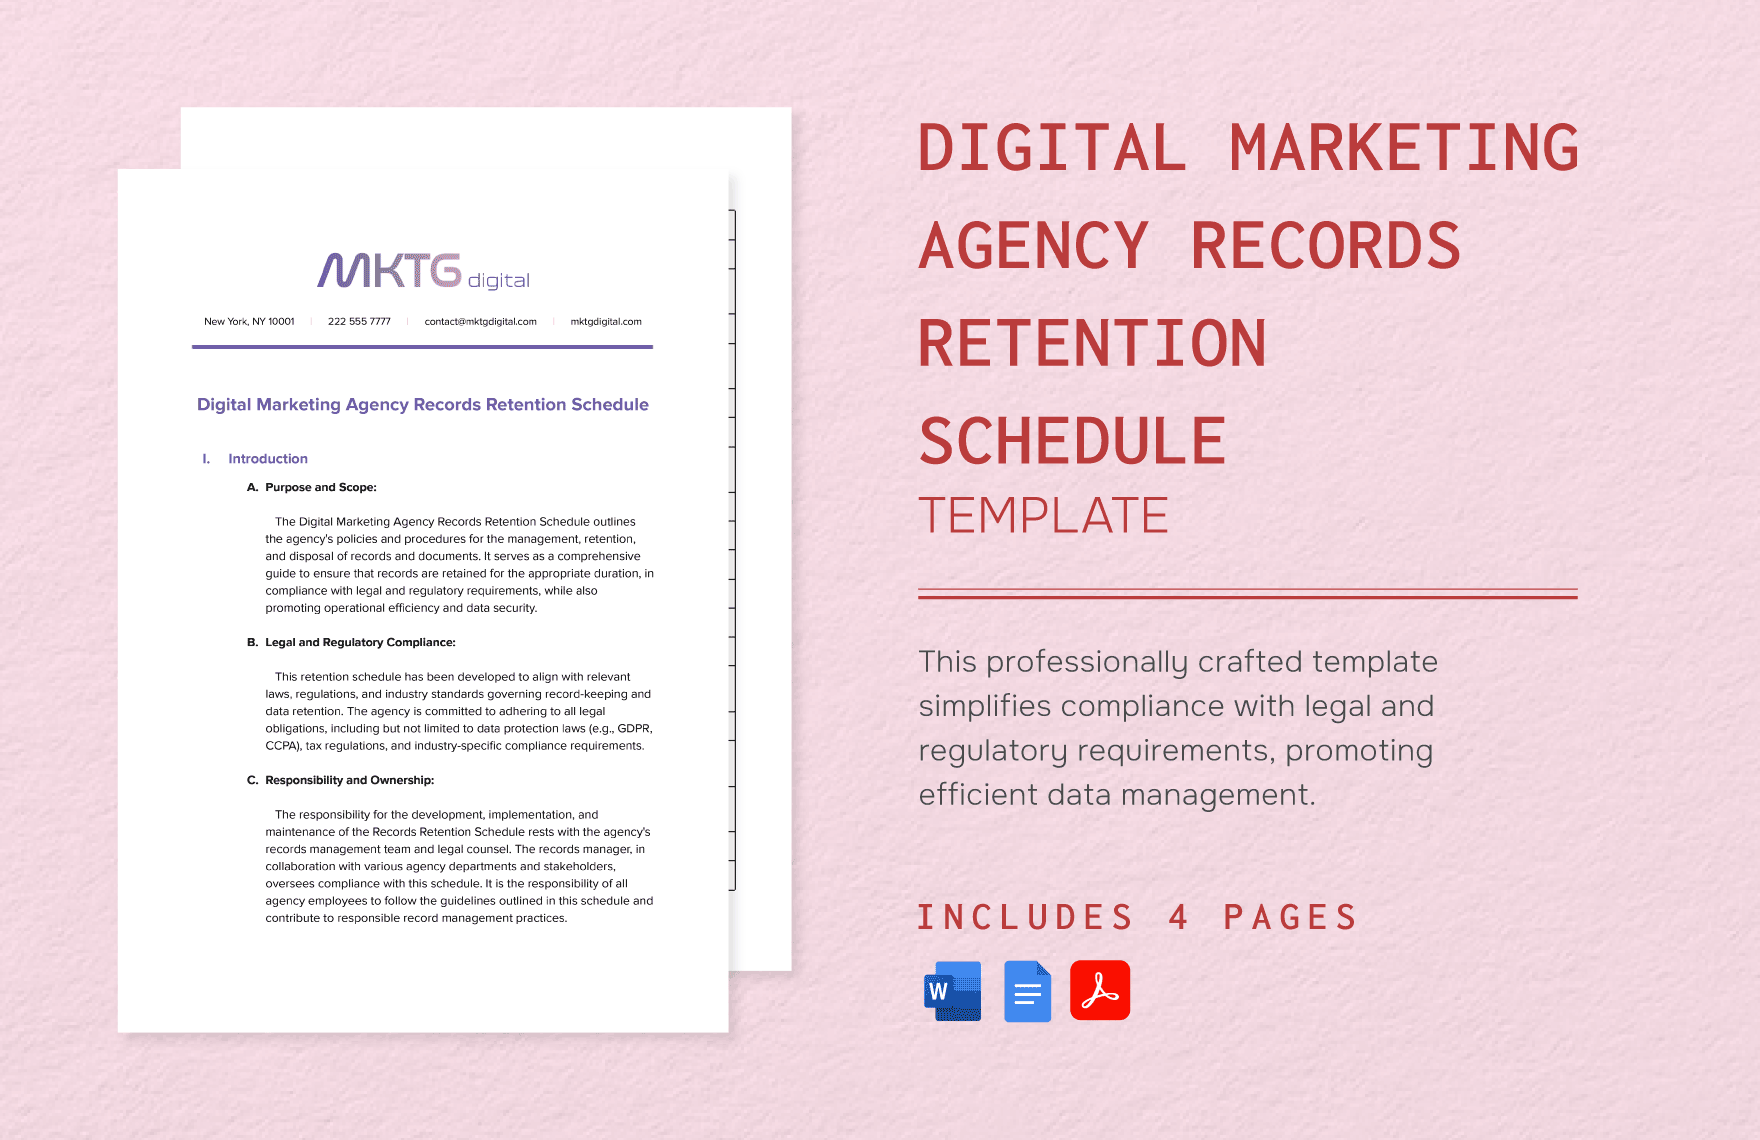 Digital Marketing Agency Records Retention Schedule Template